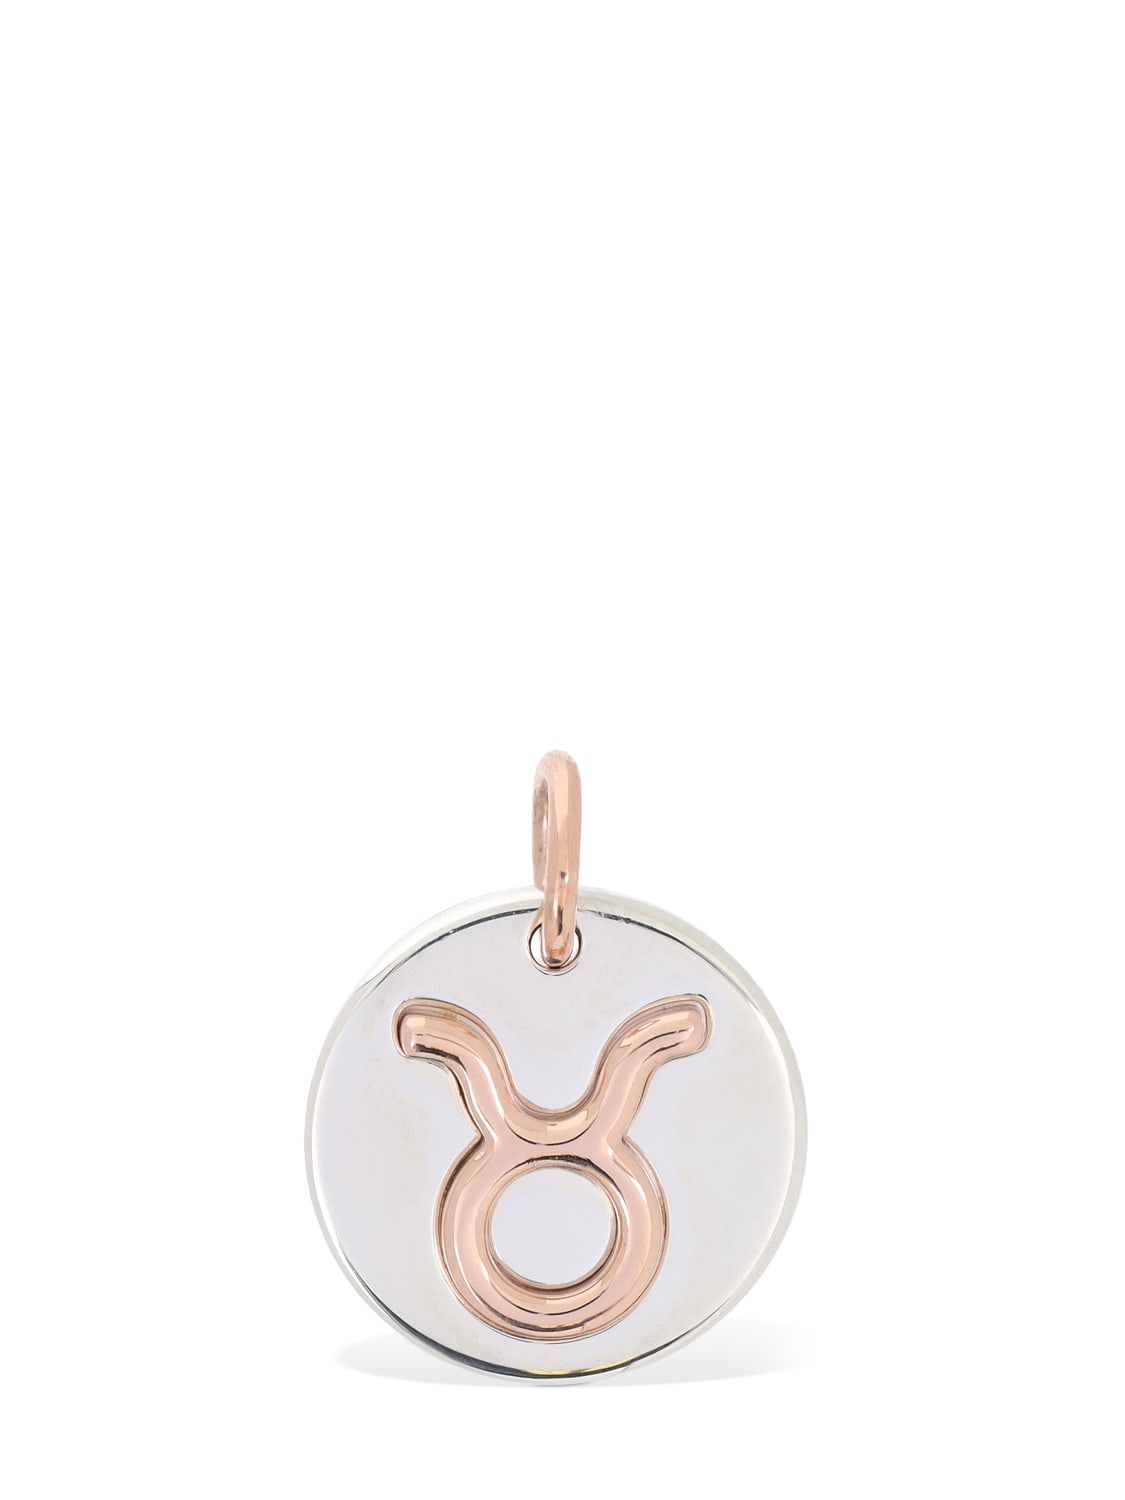 9kt Rose Gold & Silver Taurus Charm